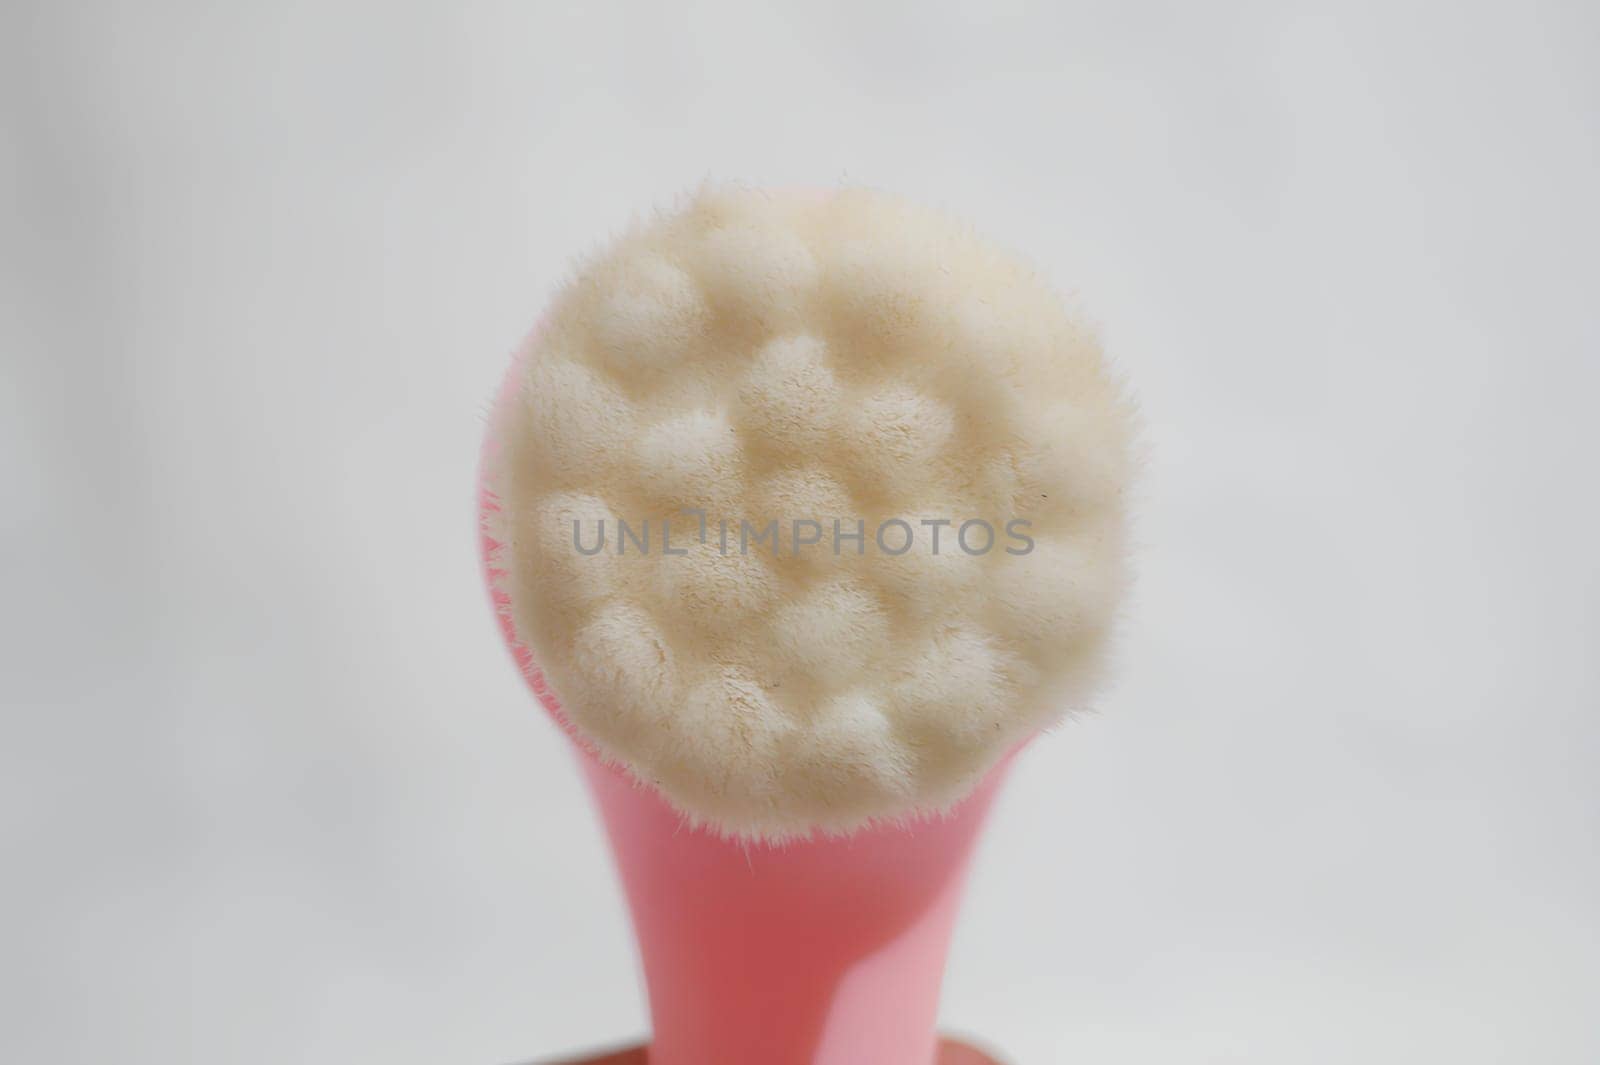 A pink brush with white bristles is shown in a close up by gadreel